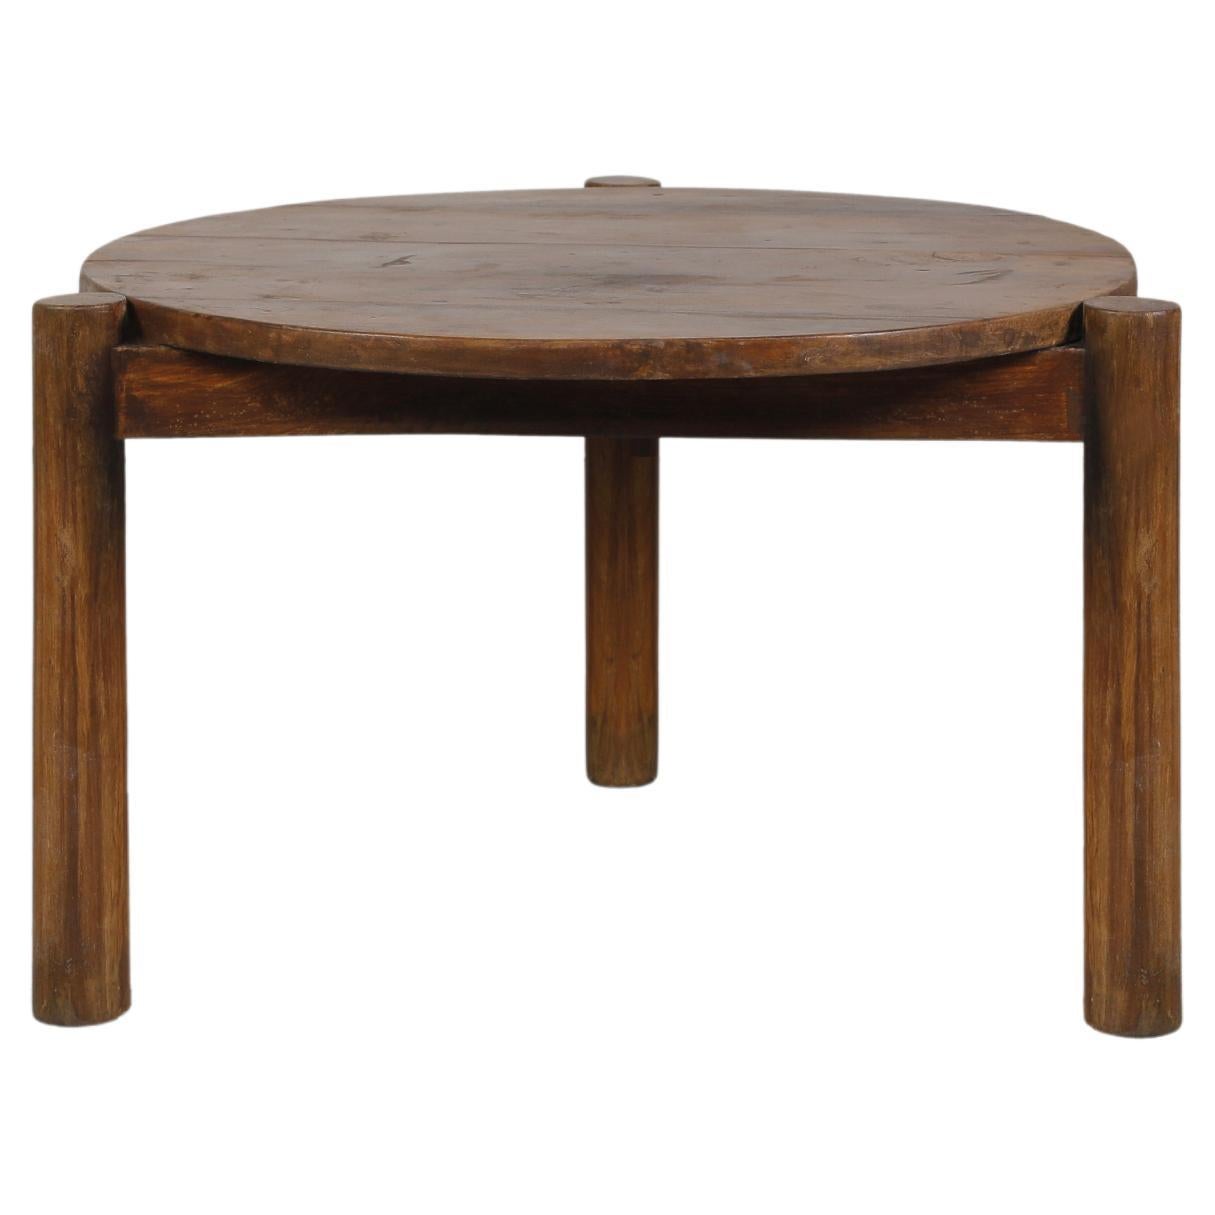 Pierre Jeanneret PJ-TB-04-A Round Low Table / Authentic Mid-Century Modern For Sale